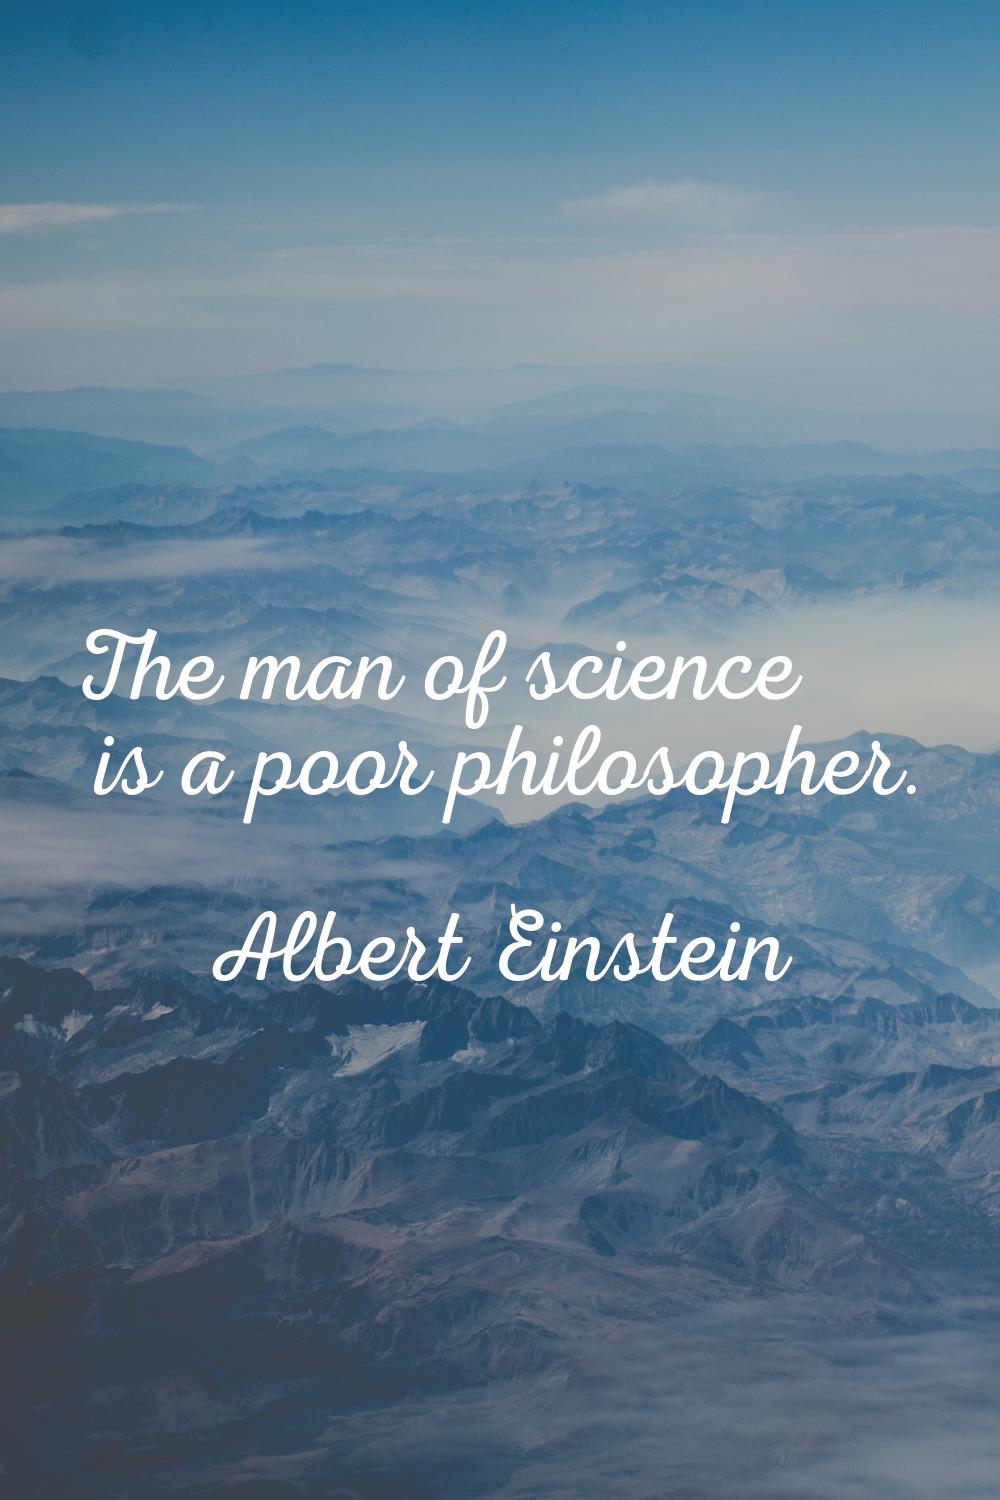 The man of science is a poor philosopher.